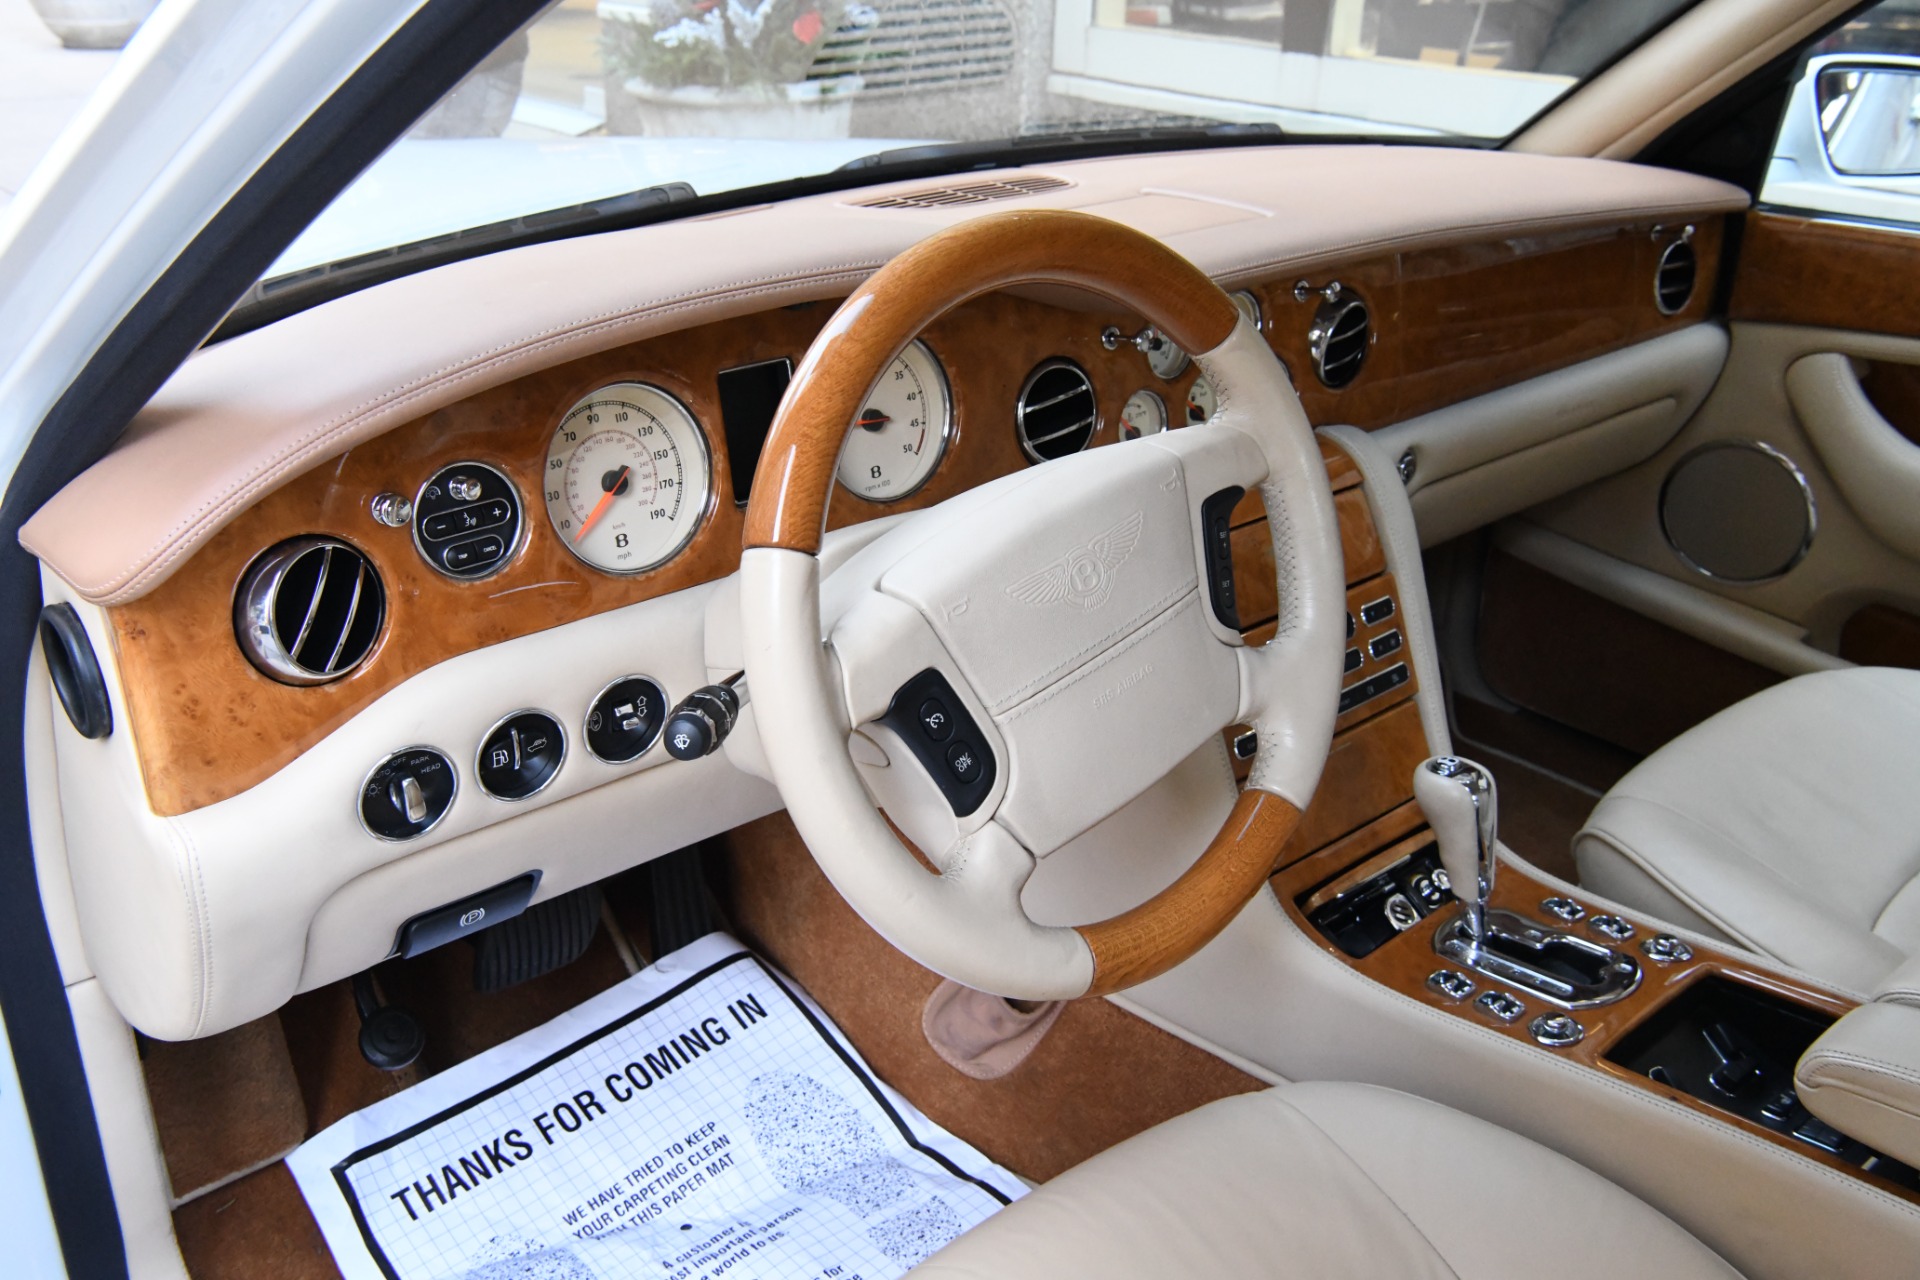 interference Celebrity Scared to die 2007 Bentley Arnage R Stock # GC3486 for sale near Chicago, IL | IL Bentley  Dealer